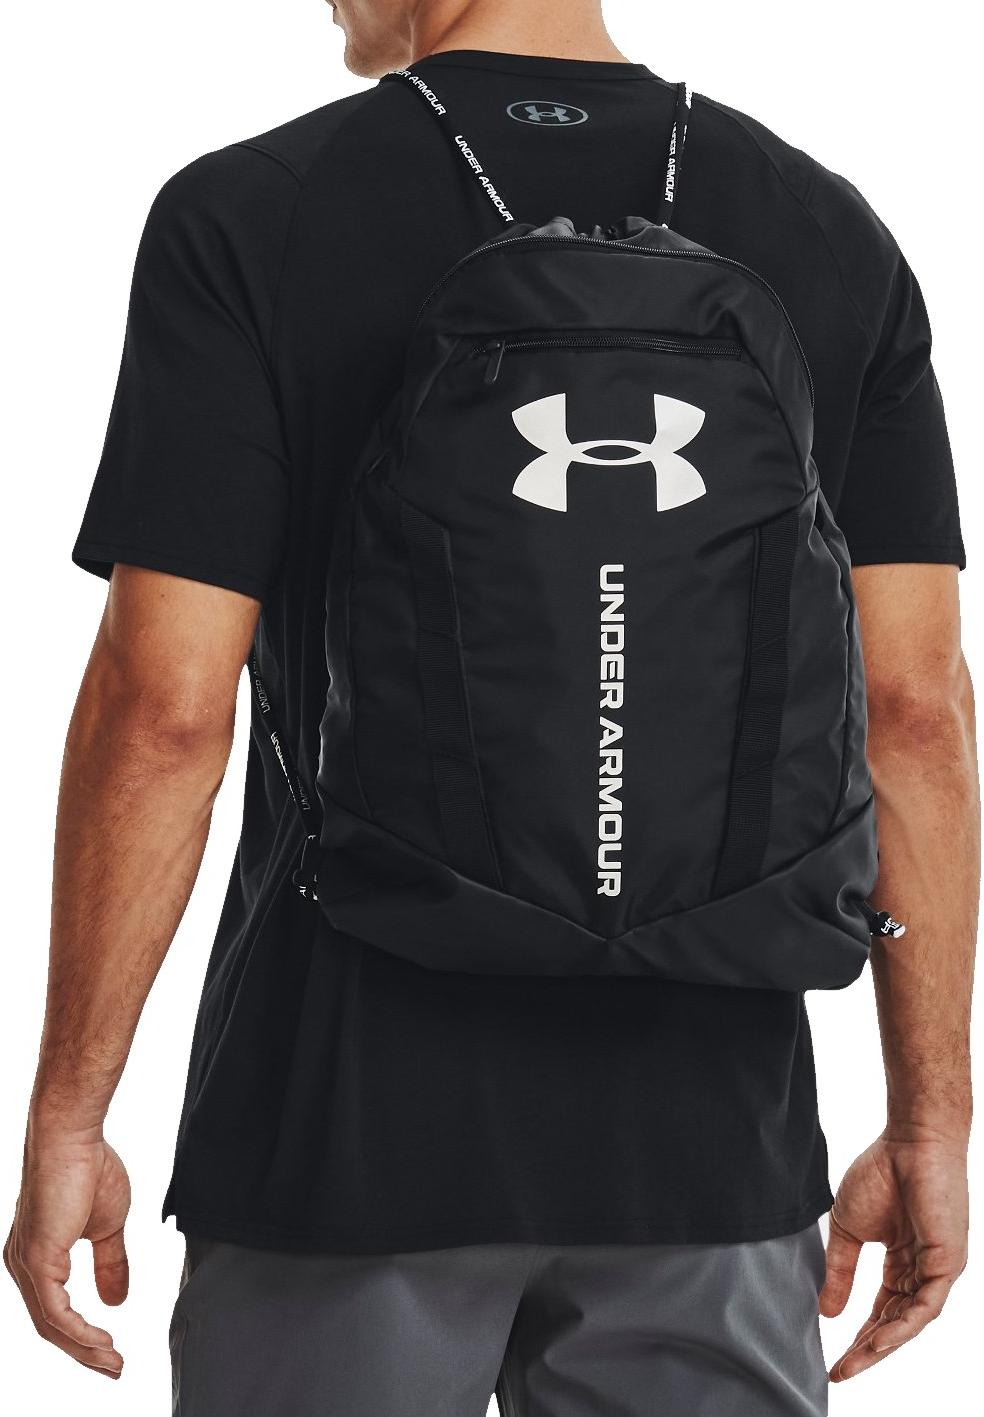 Under Armour Undeniable Sackpack | 1369220-001